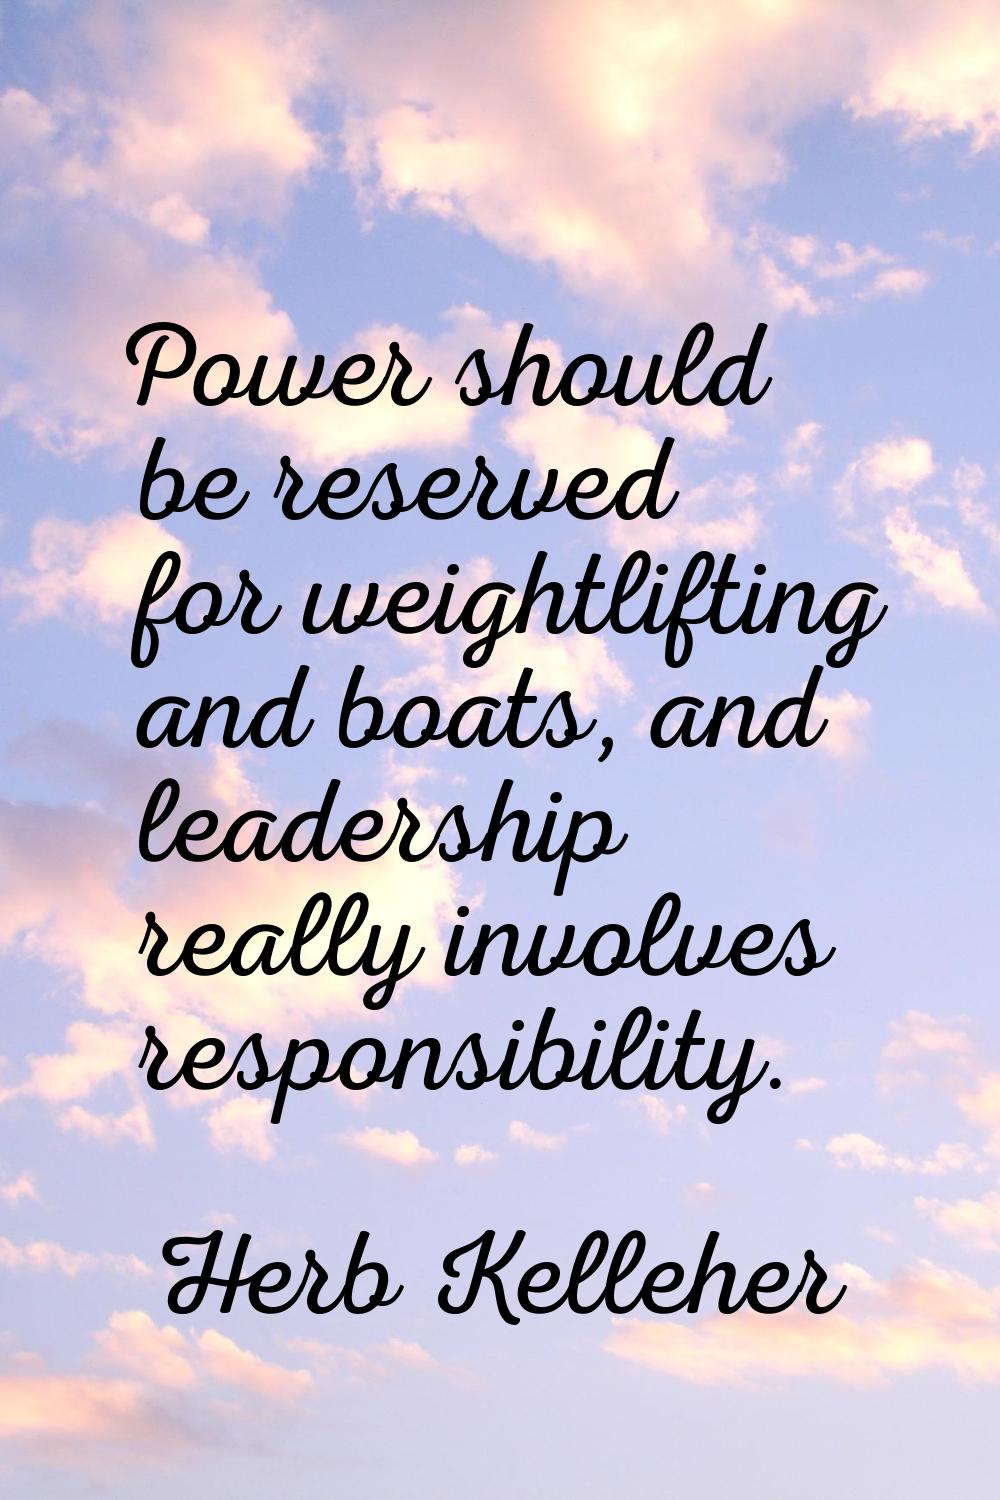 Power should be reserved for weightlifting and boats, and leadership really involves responsibility